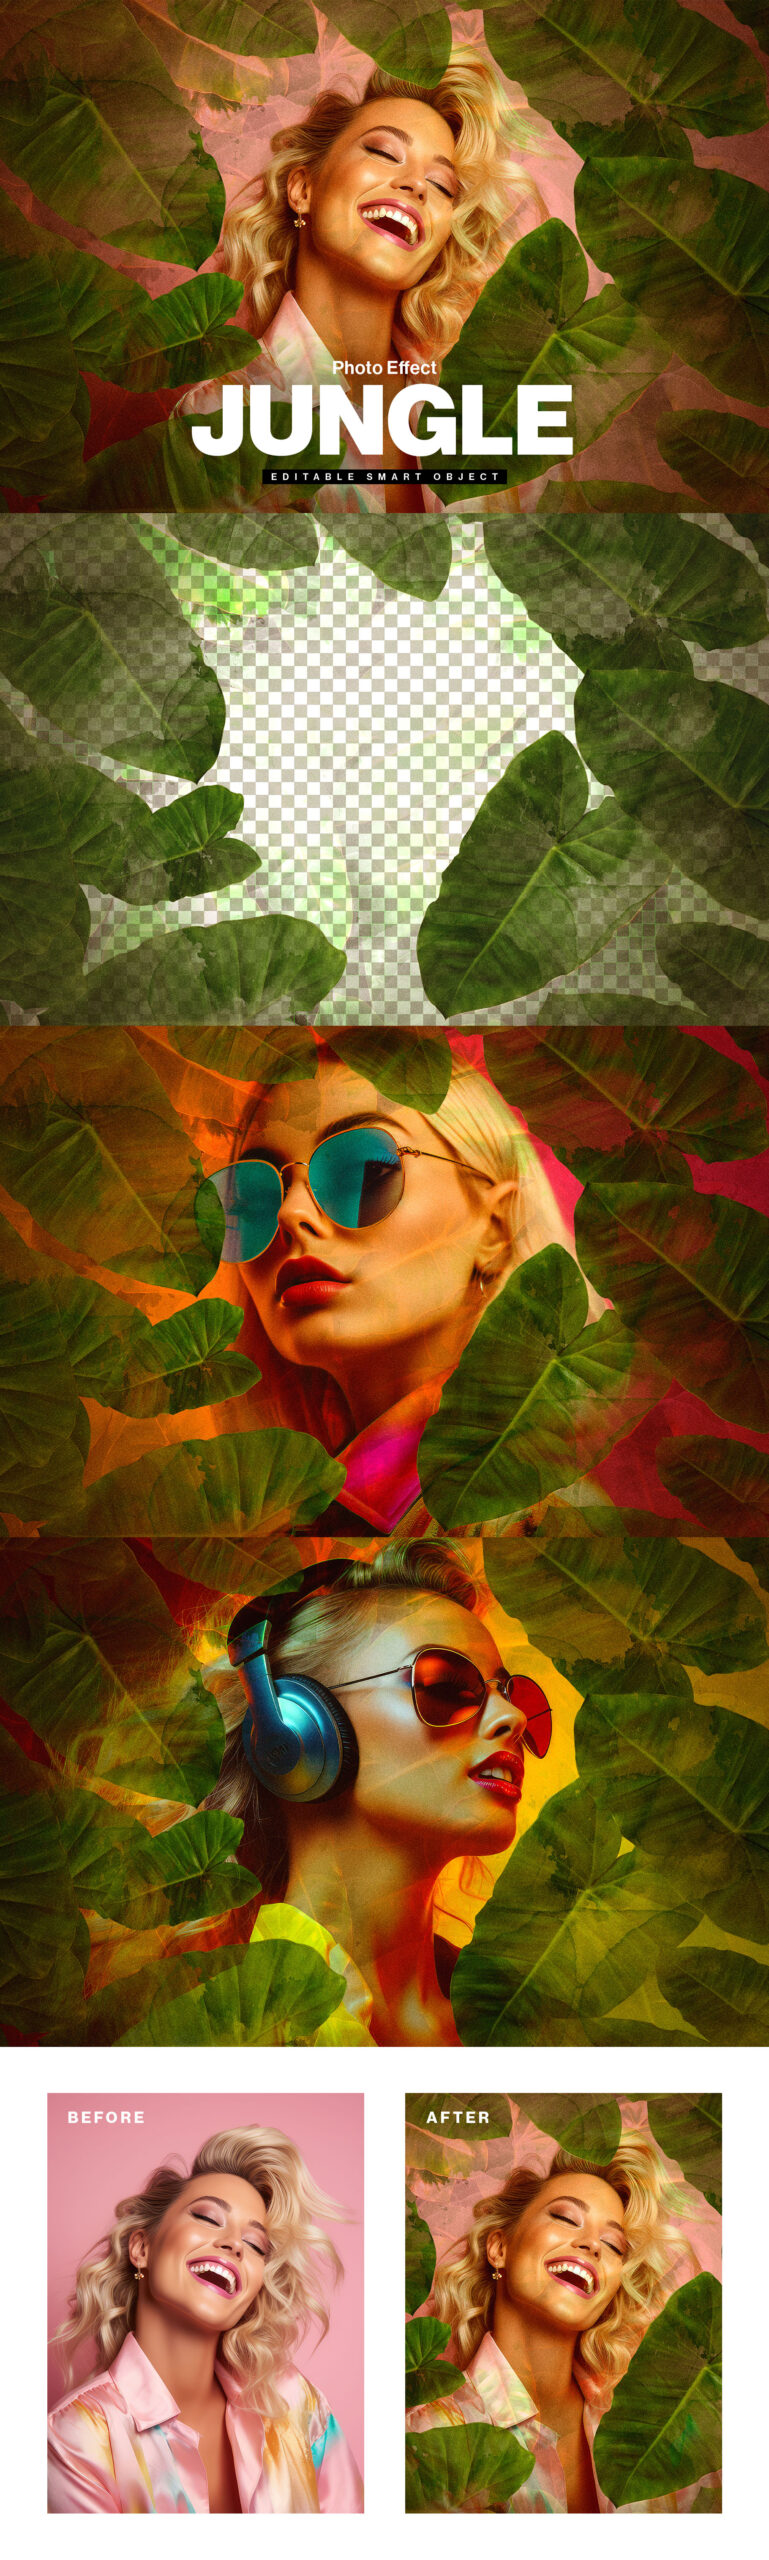 Tropical Jungle Photo Collage & Image Effect in PSD